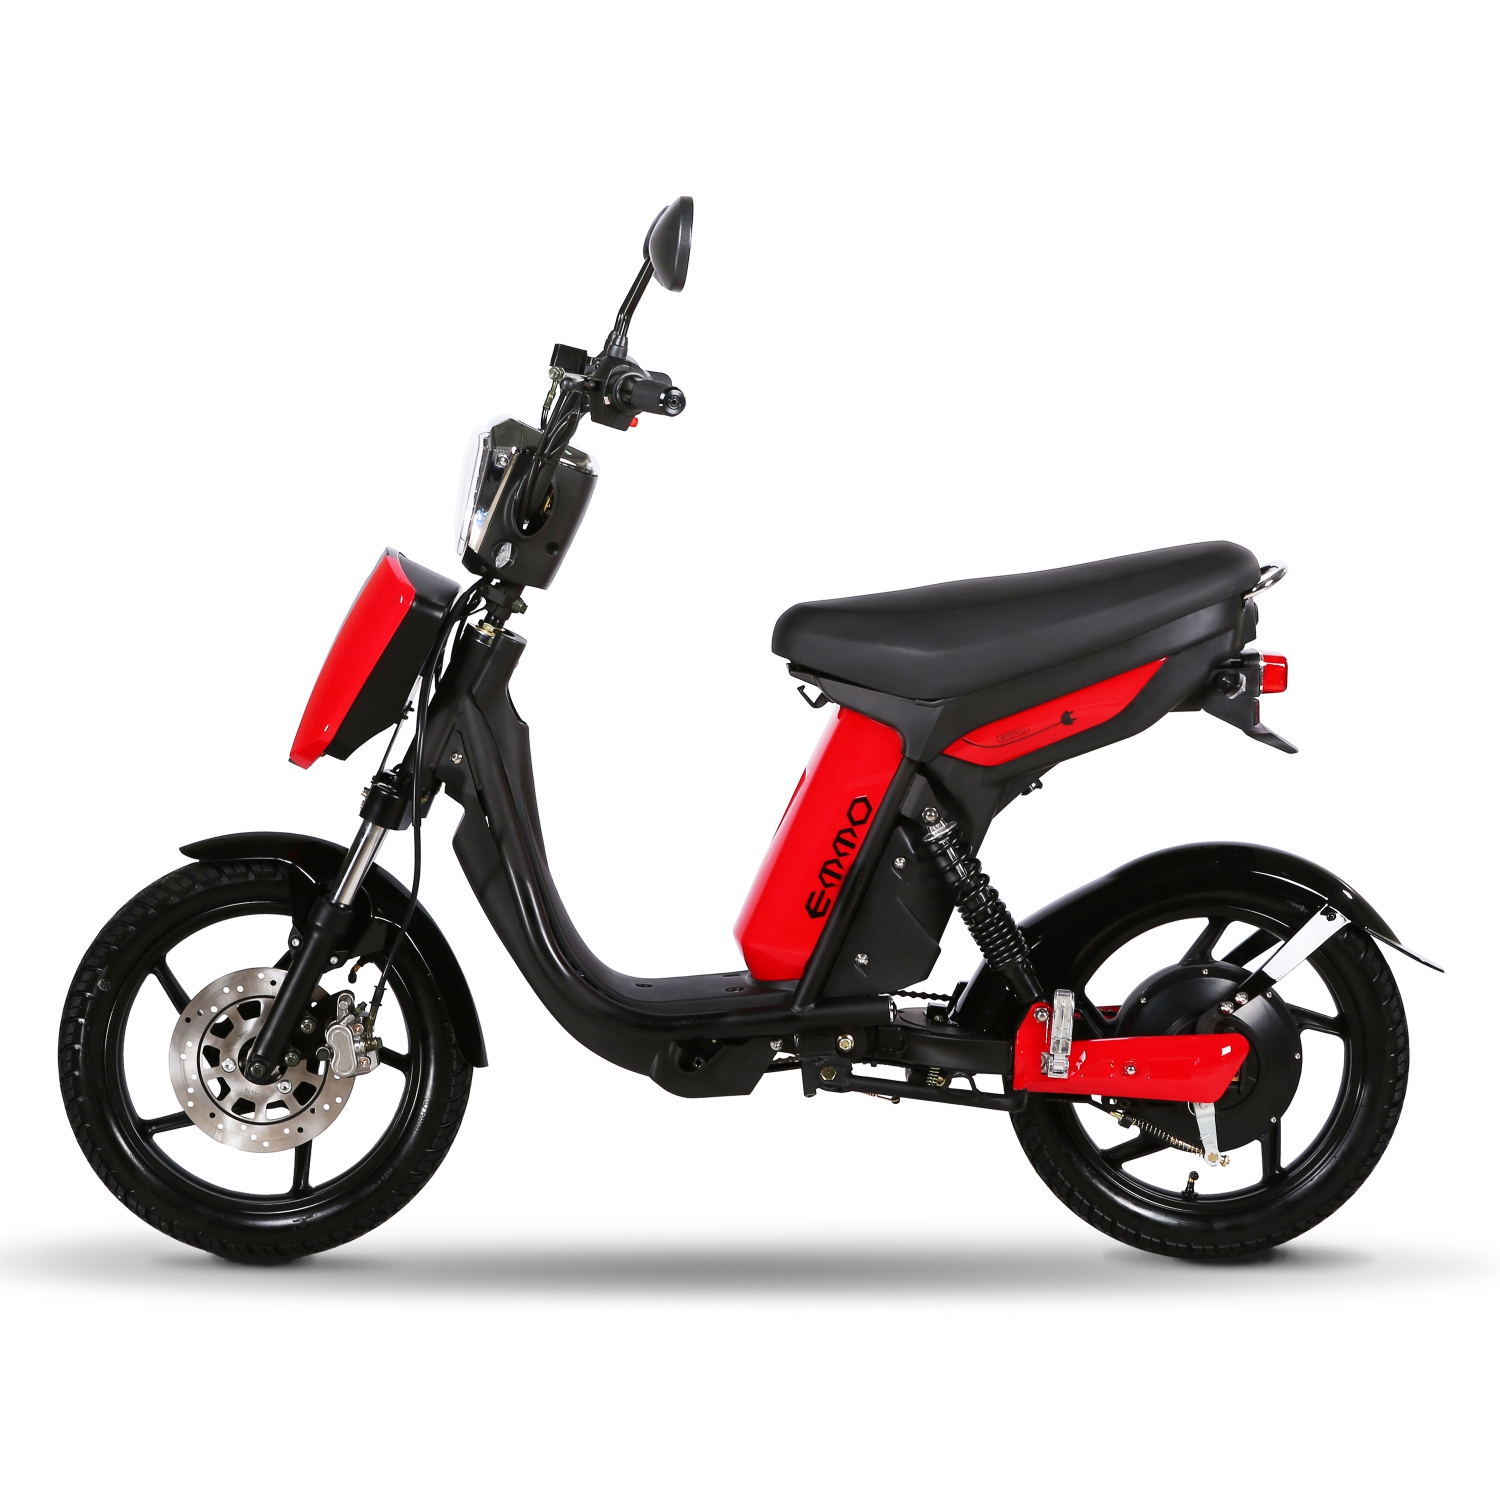 Emmo Compact Moped Electric Bike - Step Thru Scooter - 48V Removable SLA Battery - Durable Tubeless Tire - Full Suspension - Urban T Red